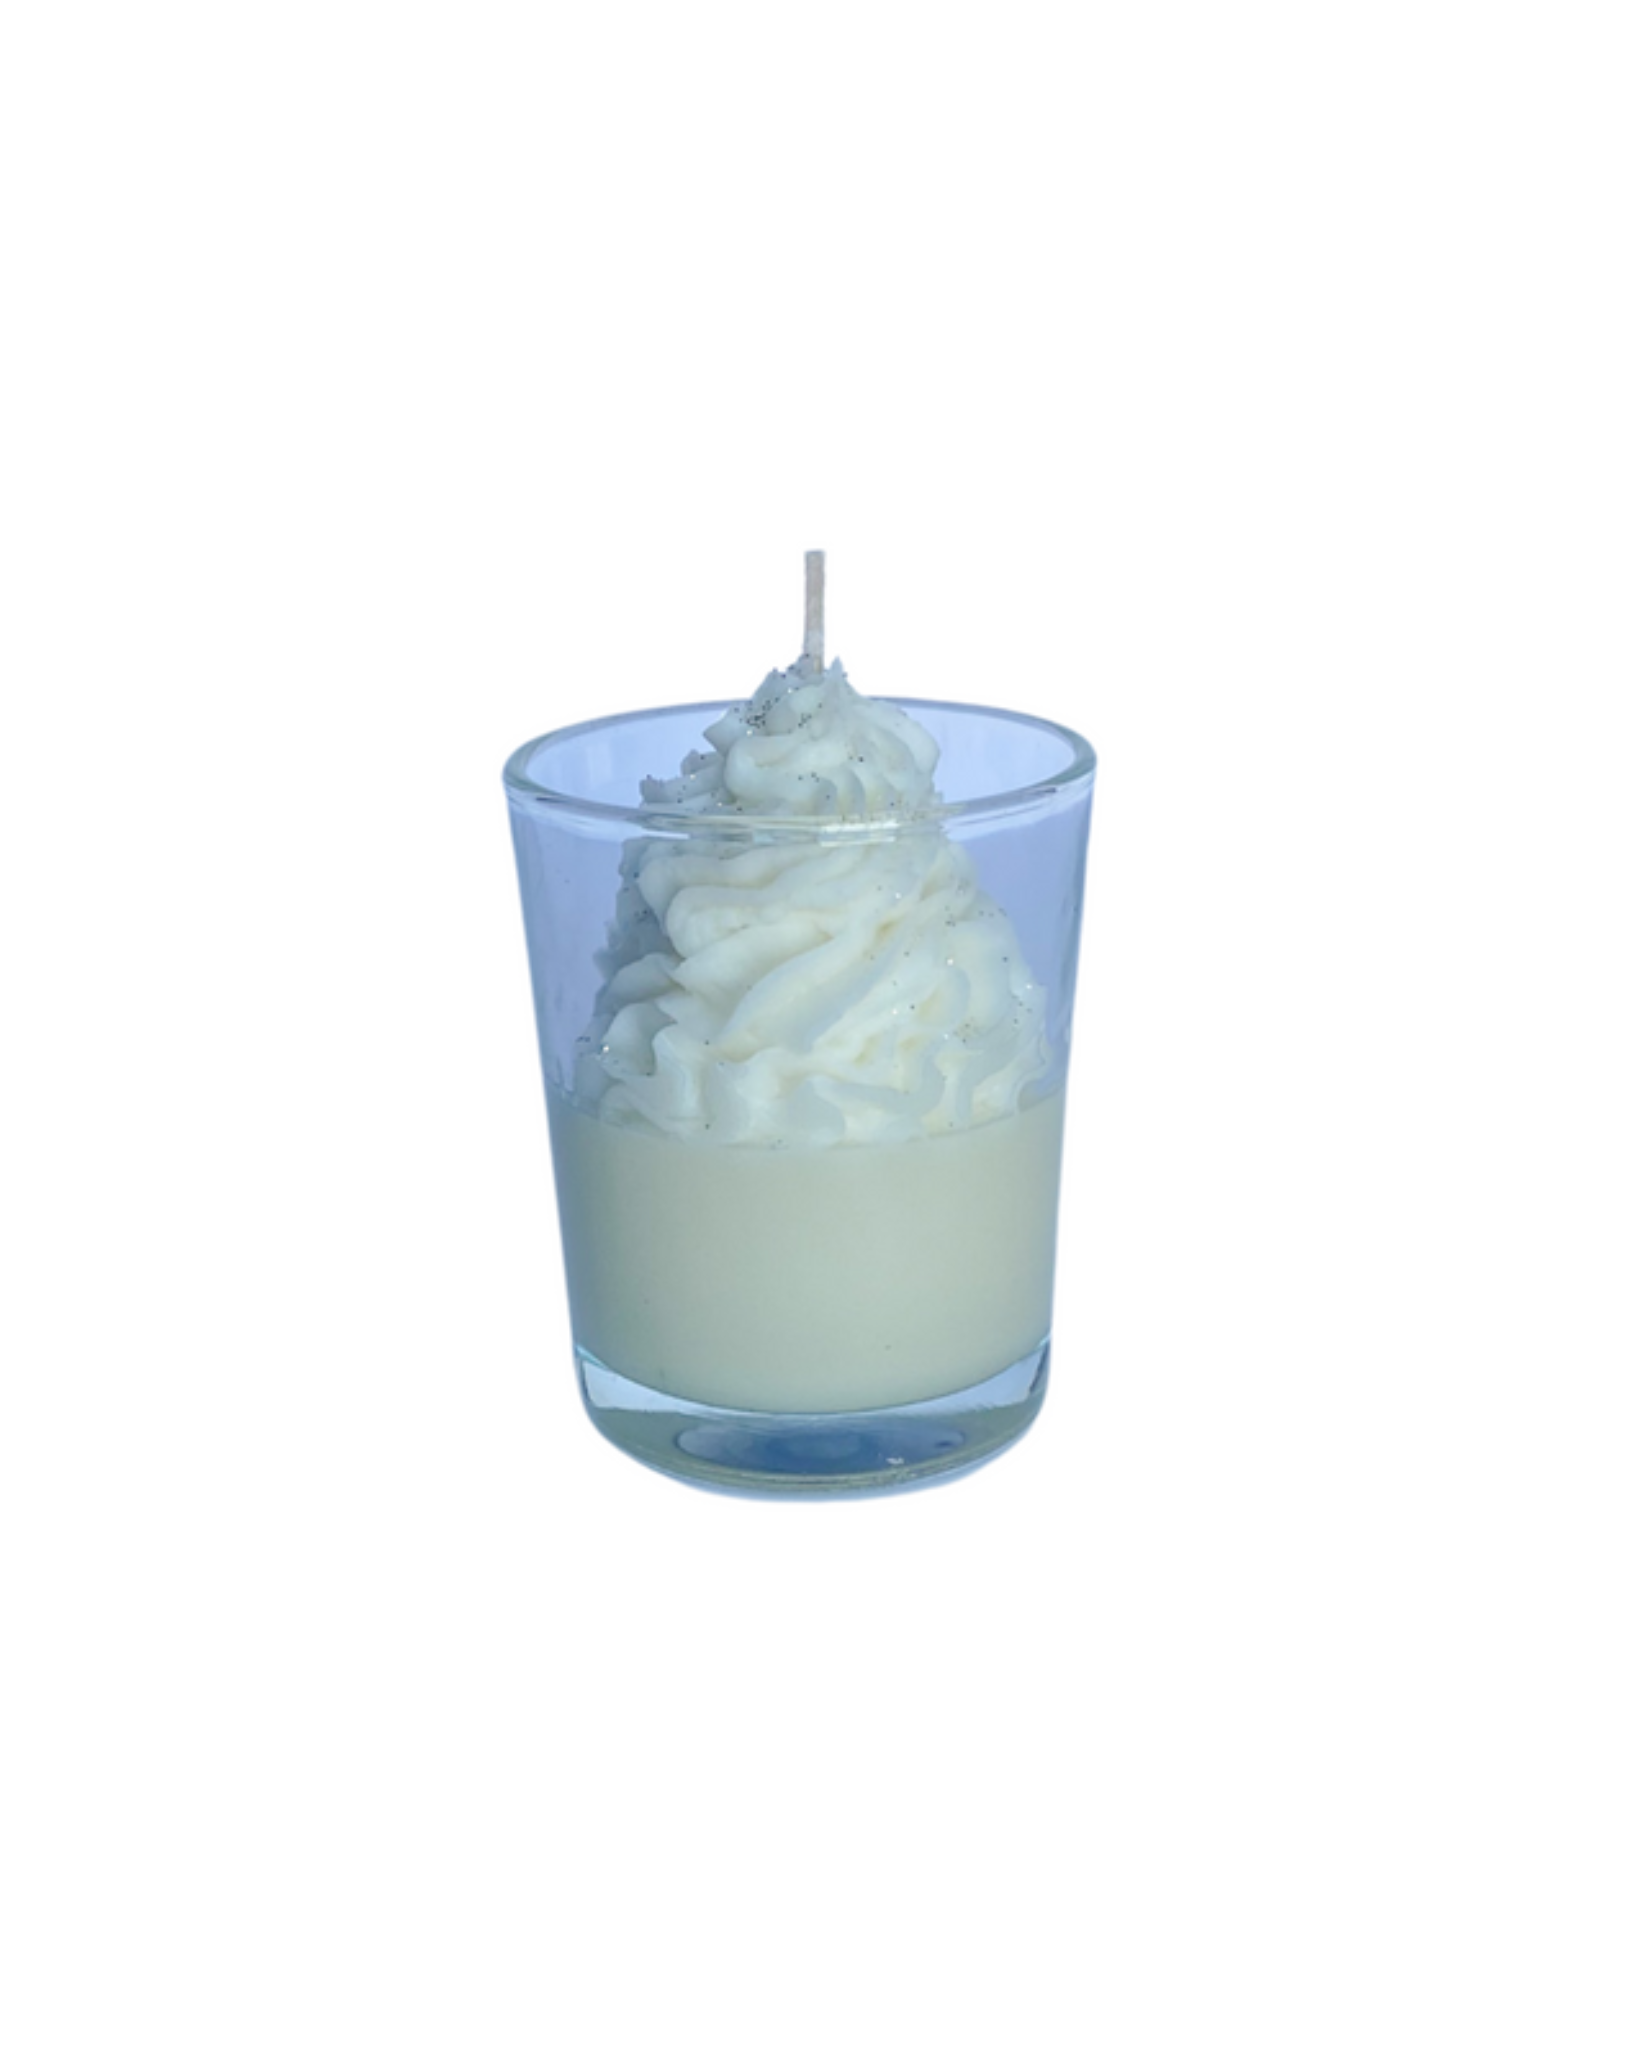 Everything Dawn Fake Cookies Sugar Cookie Scented Dessert Votive Candle